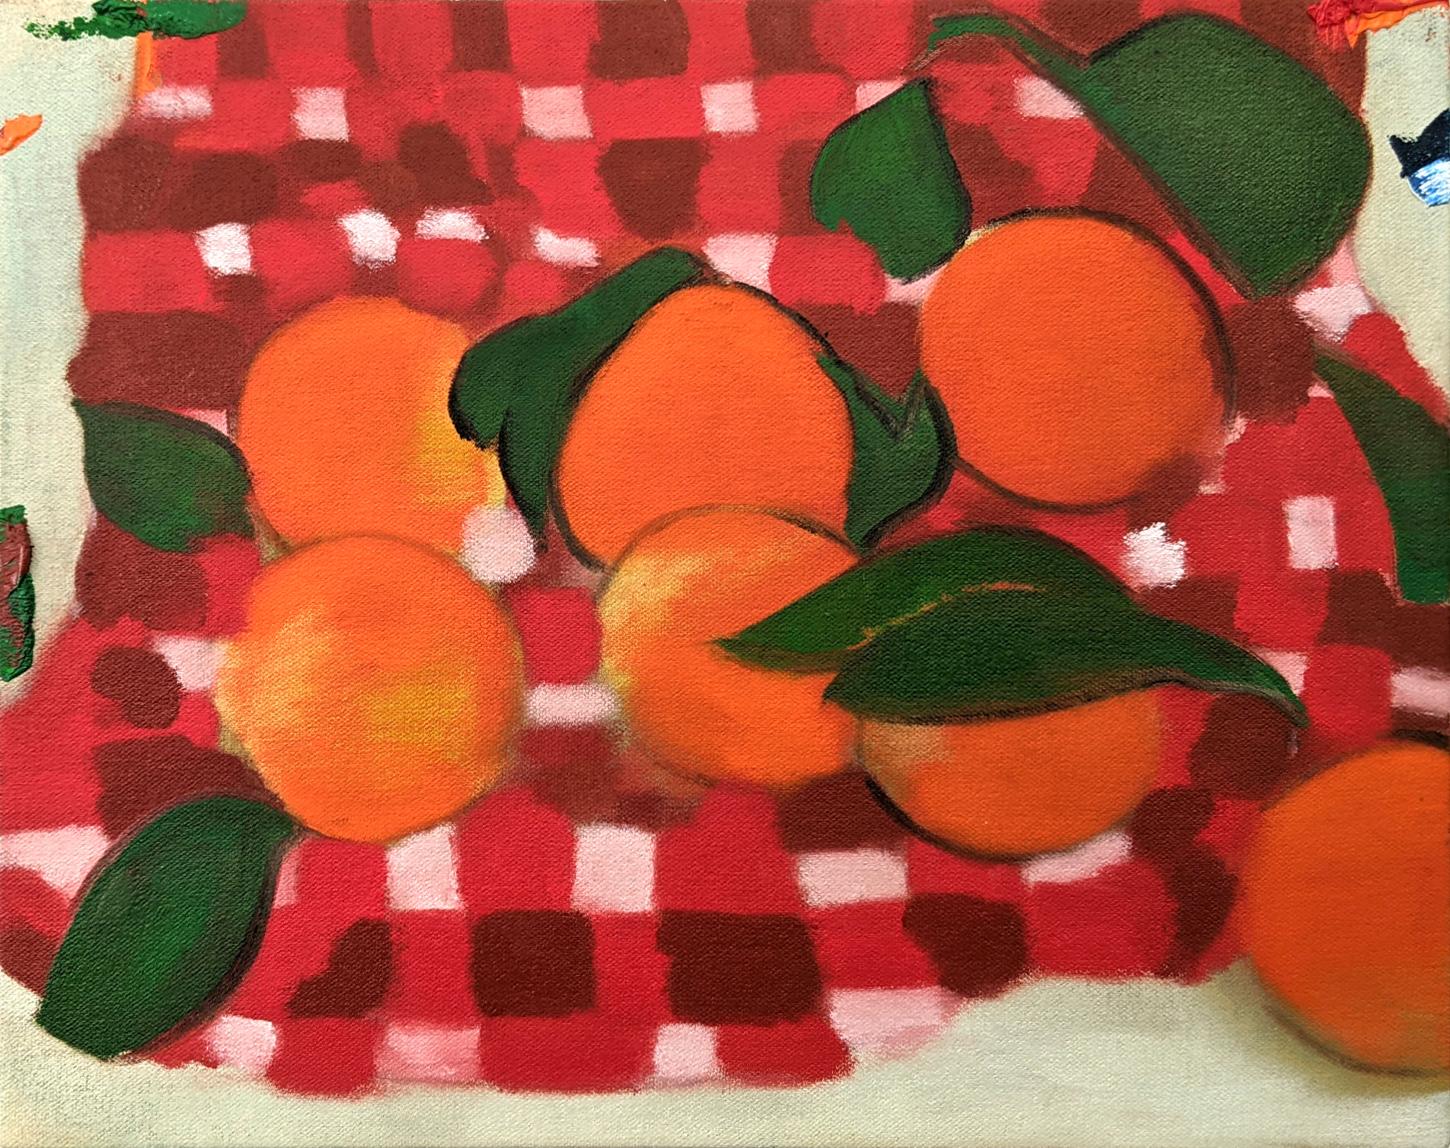 Still Life (Citrus With Drapery) - colorful, abstract, oil on canvas on panel - Painting by Mel Davis